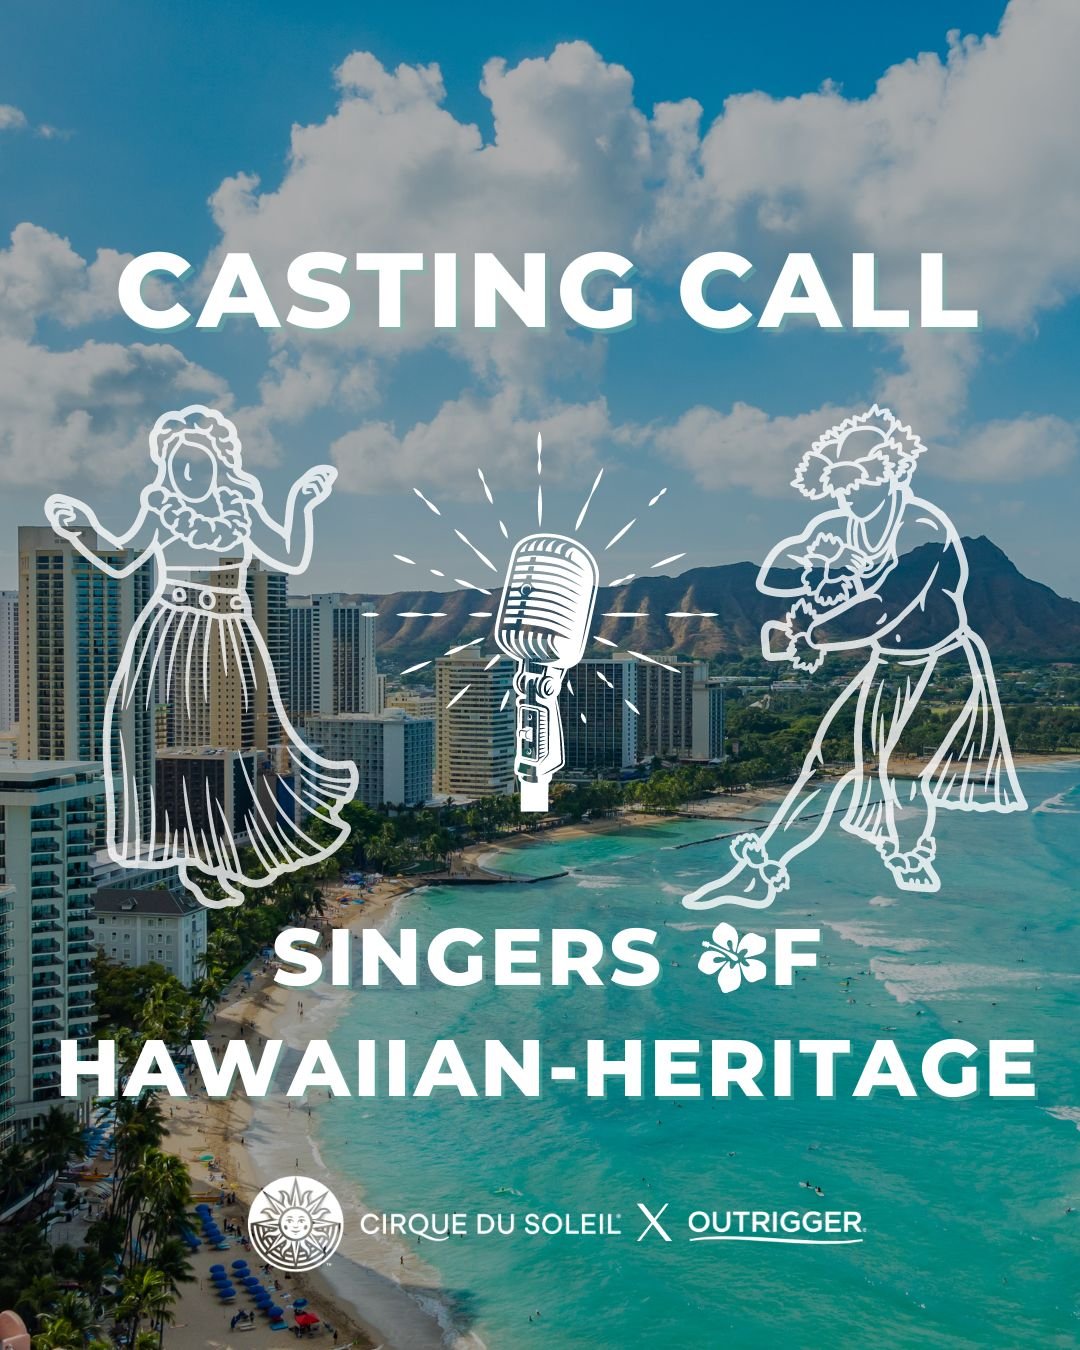 Visual for Singers Casting Call Resident SHow